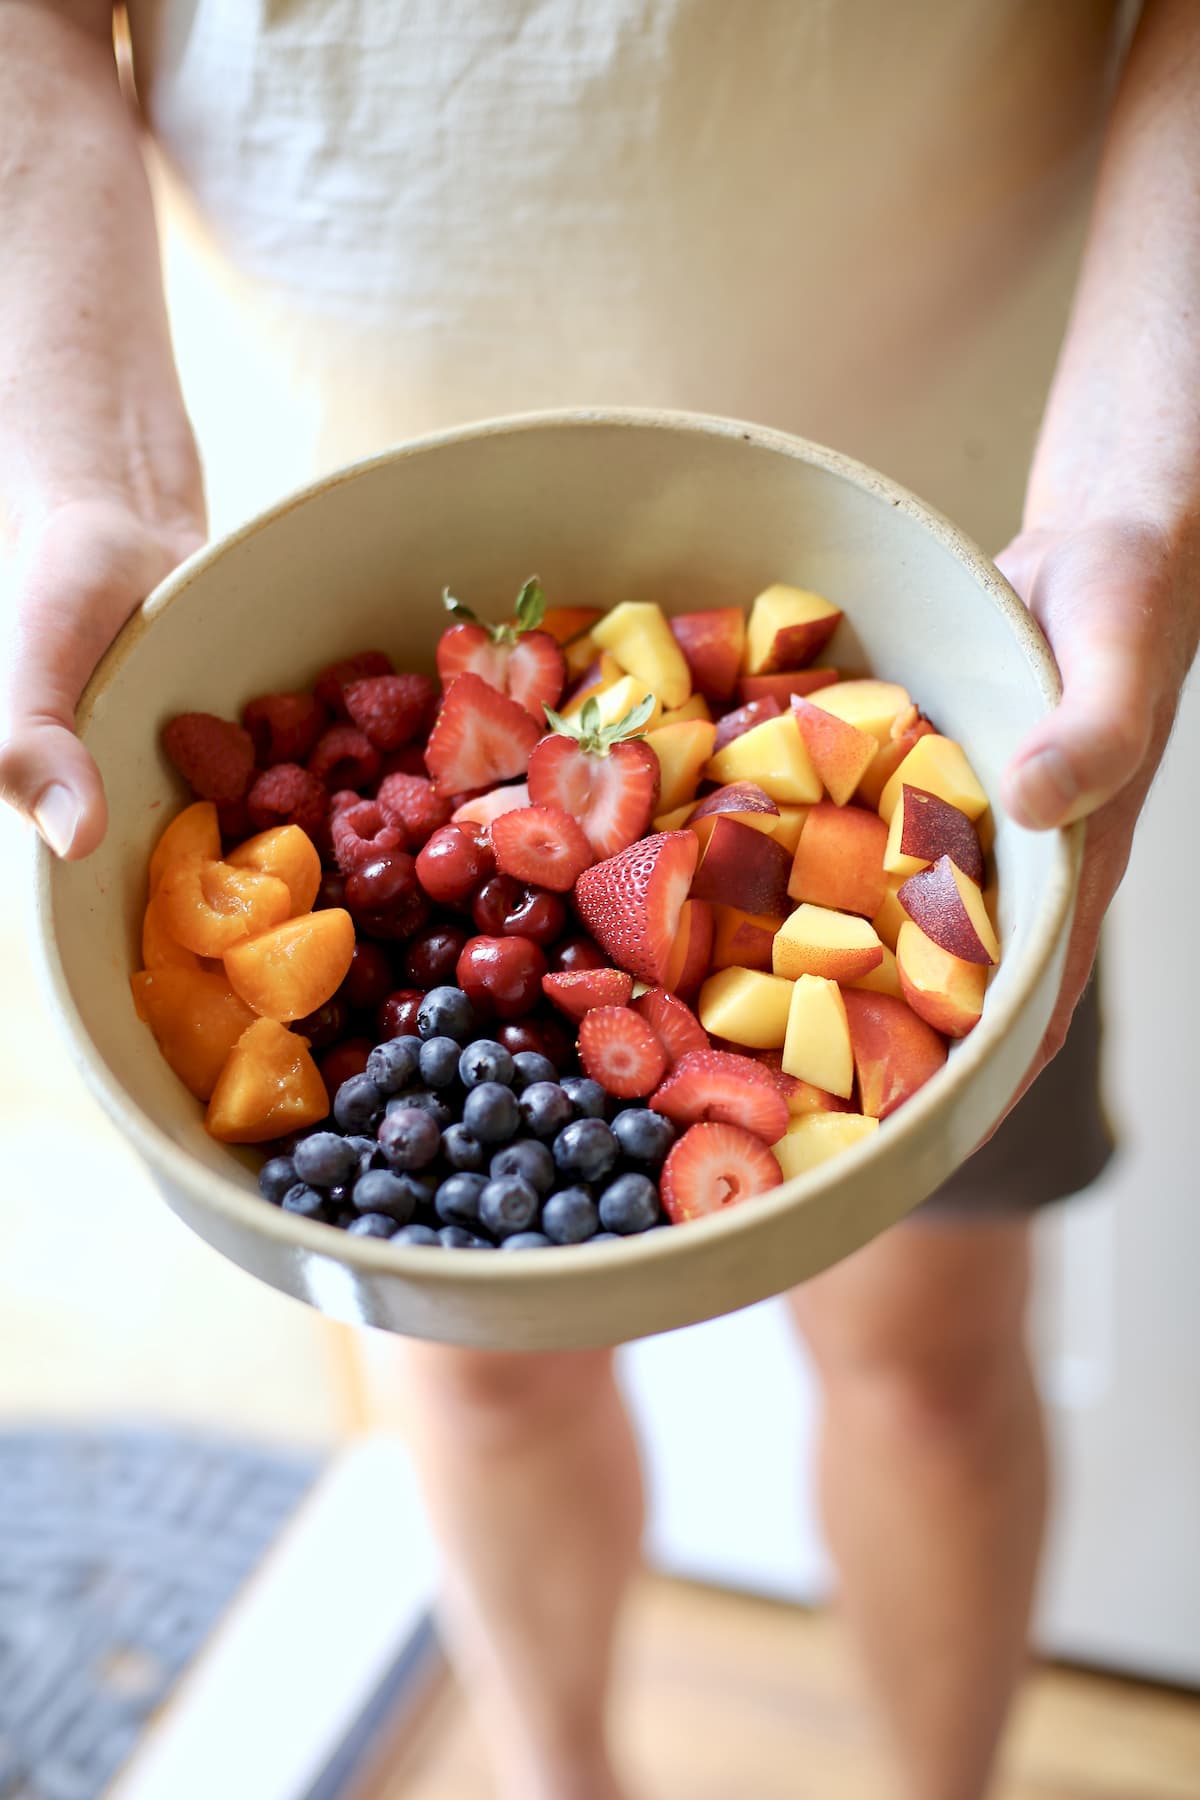 a bowl of fresh fruit held by a person with shorts on.